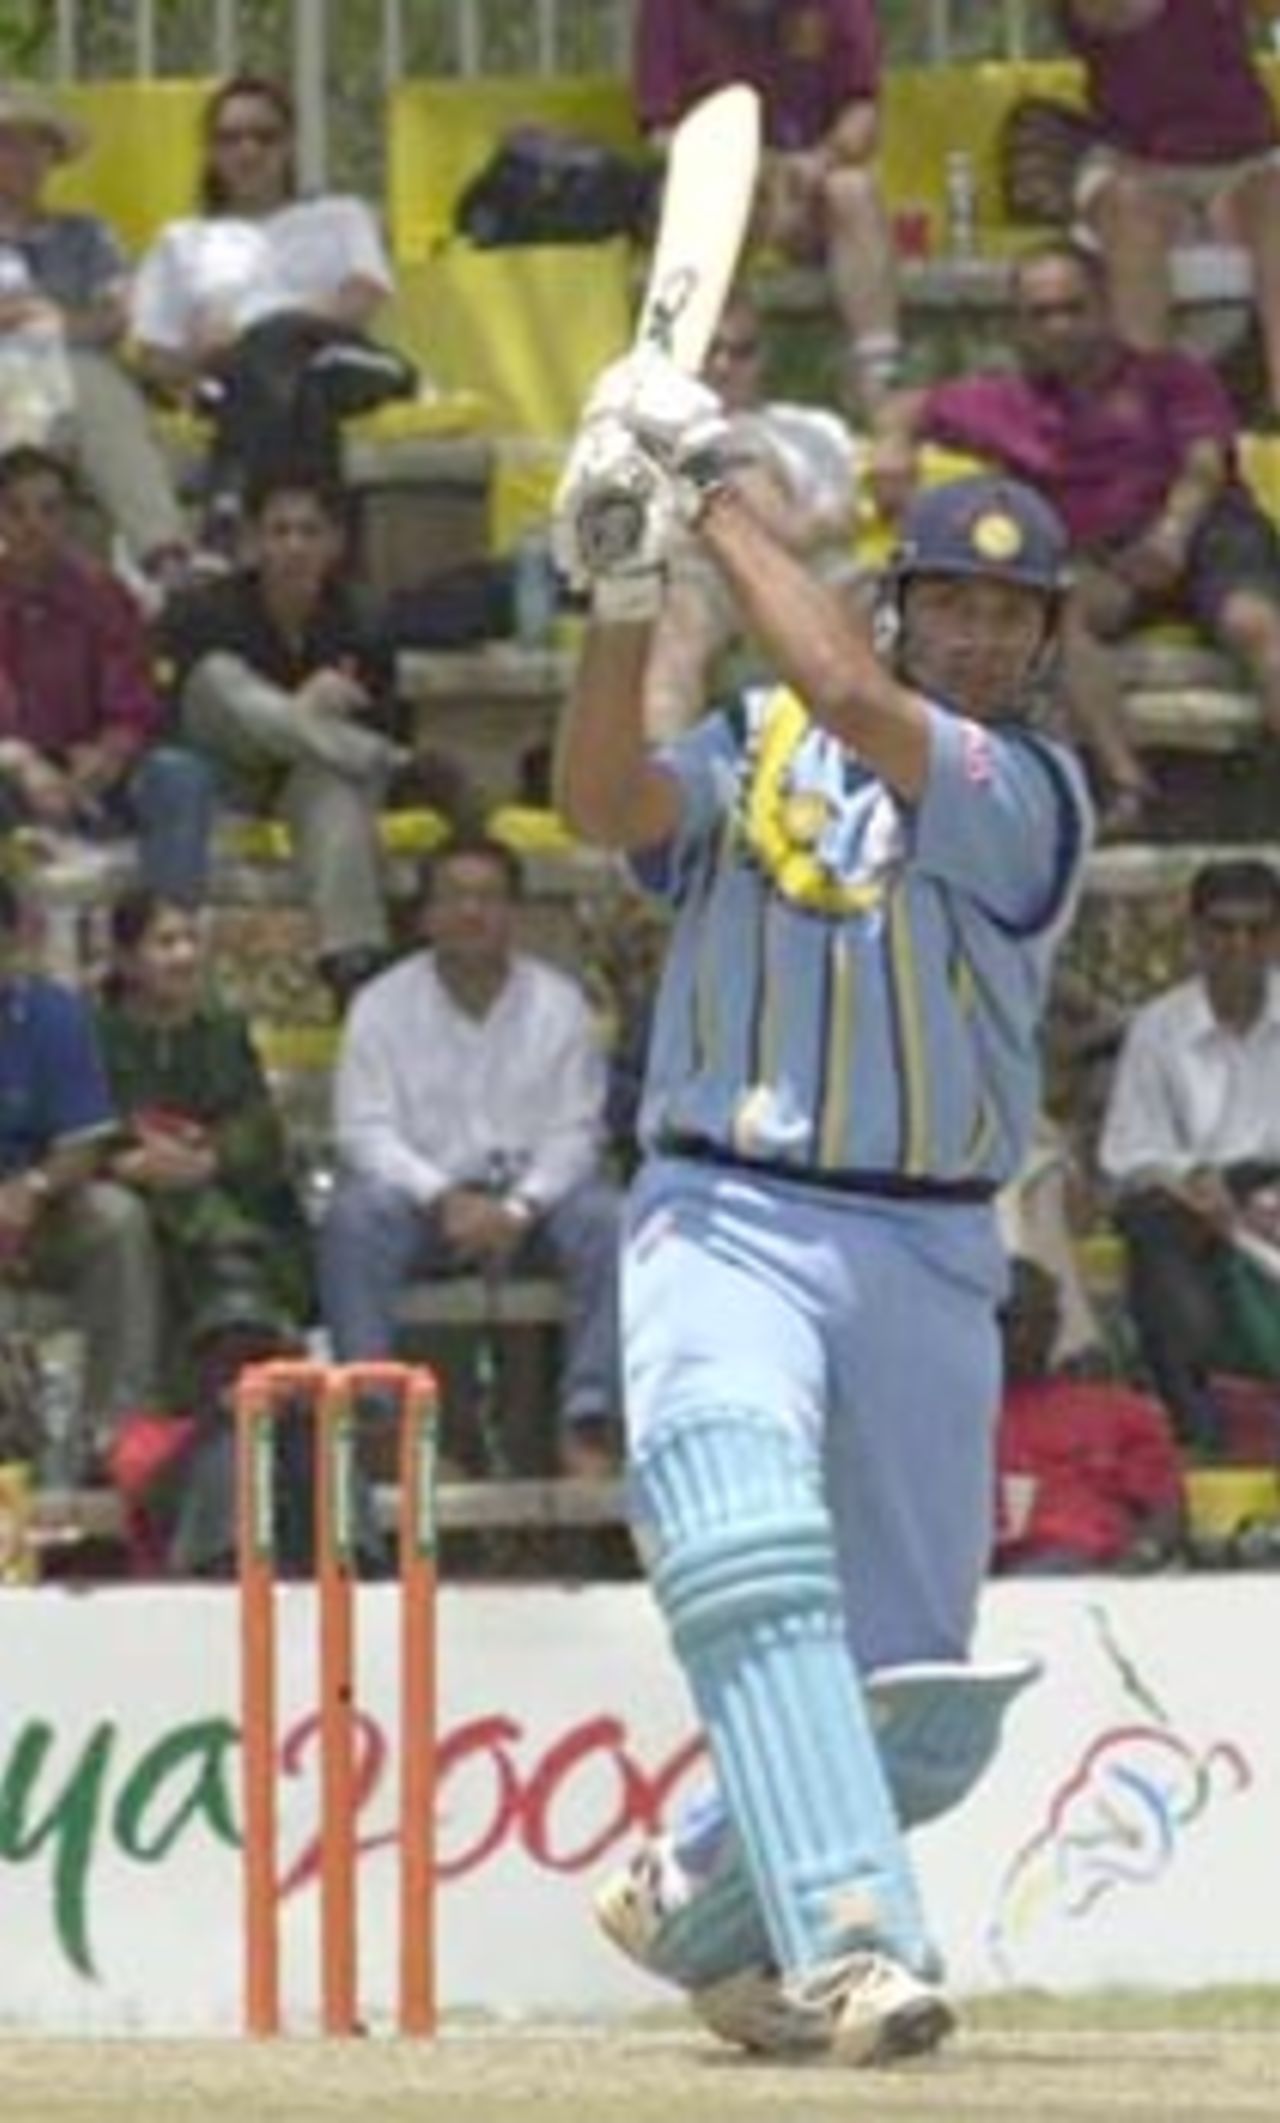 Yuvraj drives the ball to the long on fence. ICC KnockOut 2000/01, 2nd Semi Final, India v South Africa, Gymkhana Club Ground, Nairobi, 13 October 2000